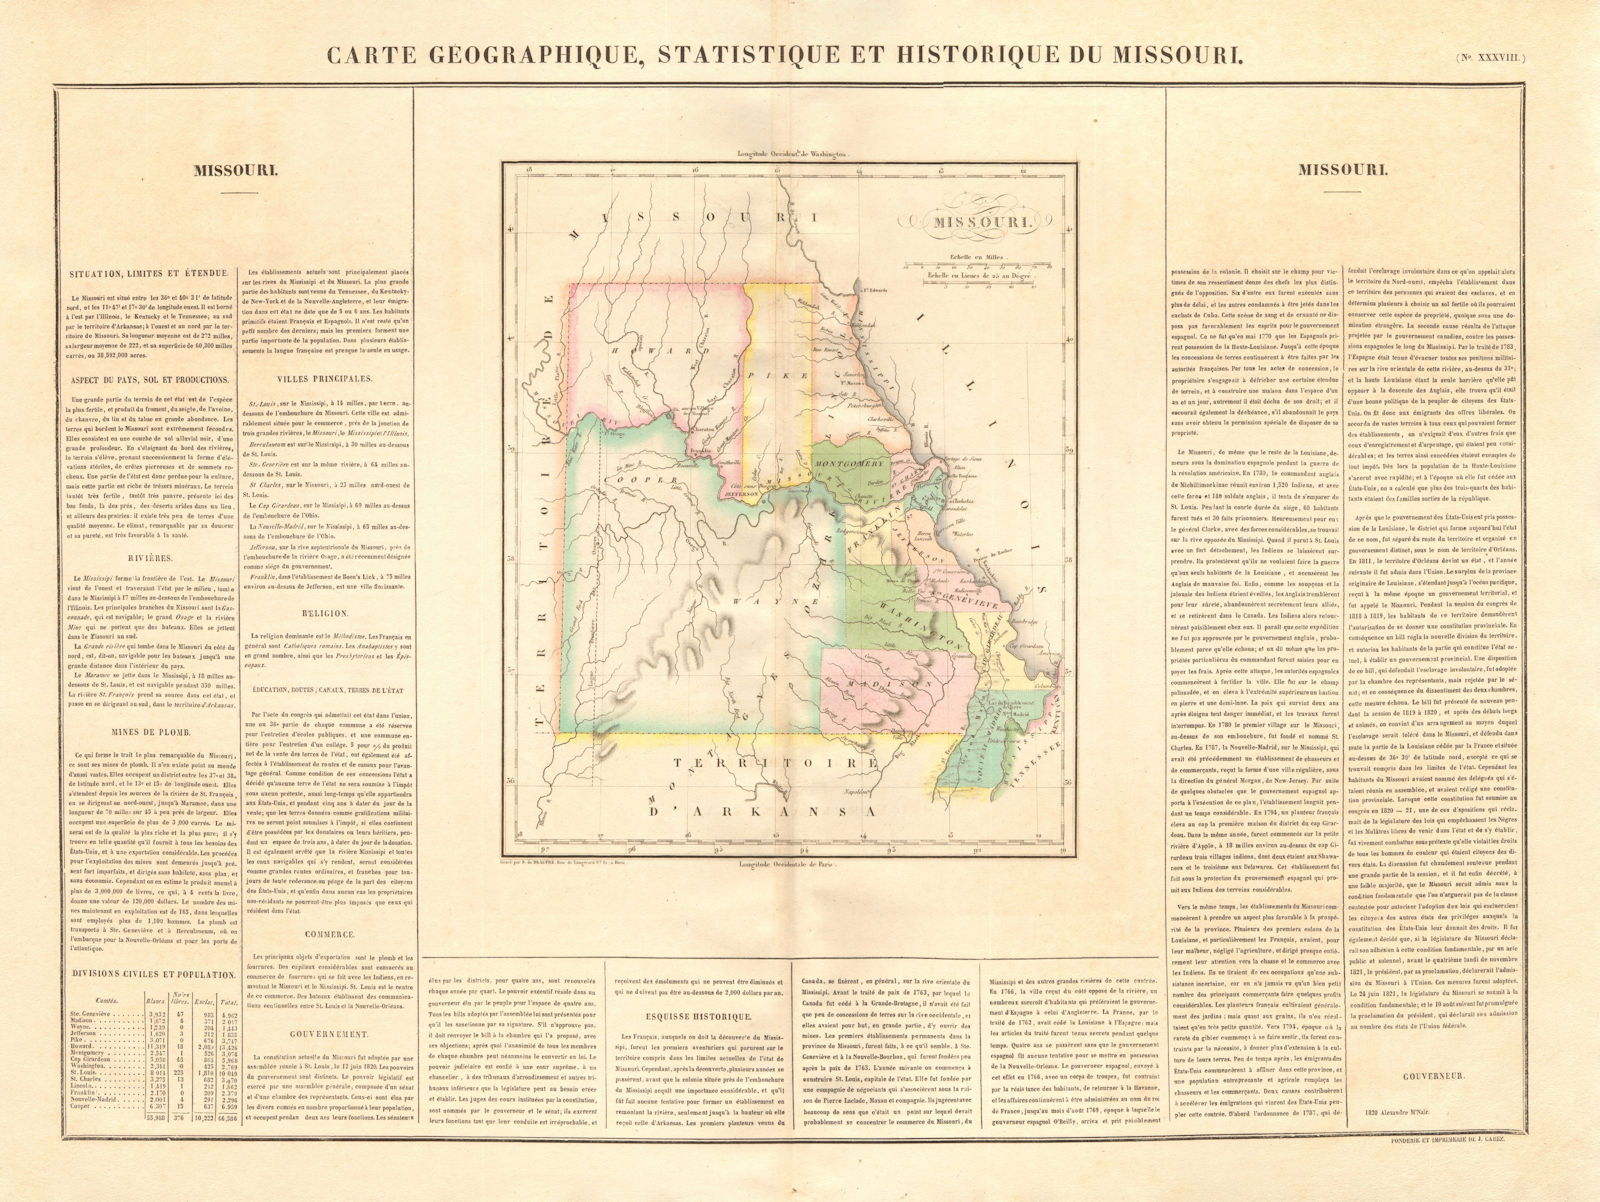 Missouri state map. Borders <1837 Platte Purchase. Indian frontier. BUCHON 1825